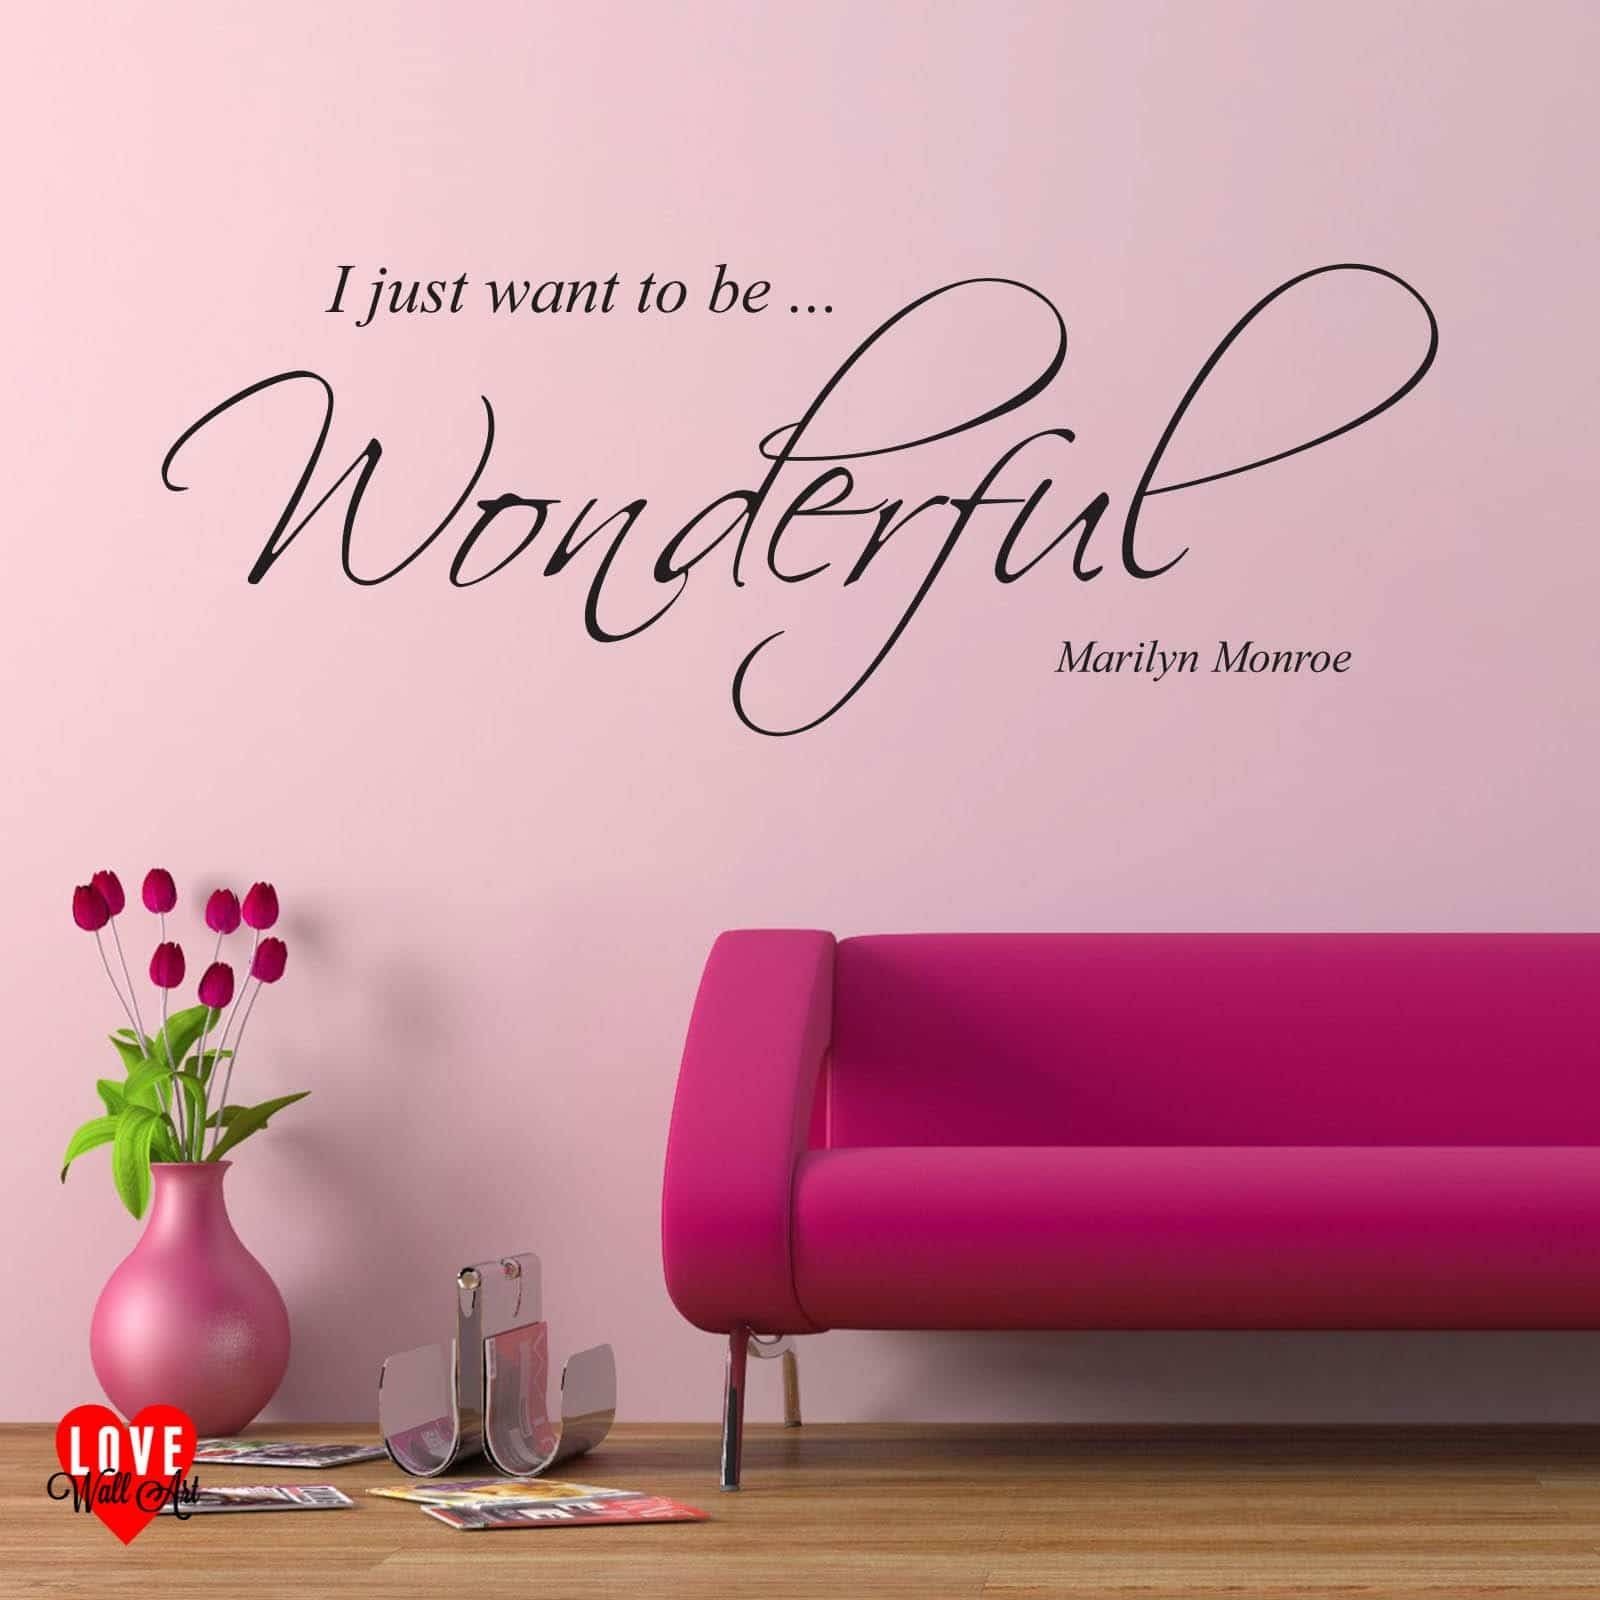 Monroe Quote I Just Want To Be Wonderful Wall Art Sticker With 2017 Marilyn Monroe Wall Art Quotes (View 13 of 25)